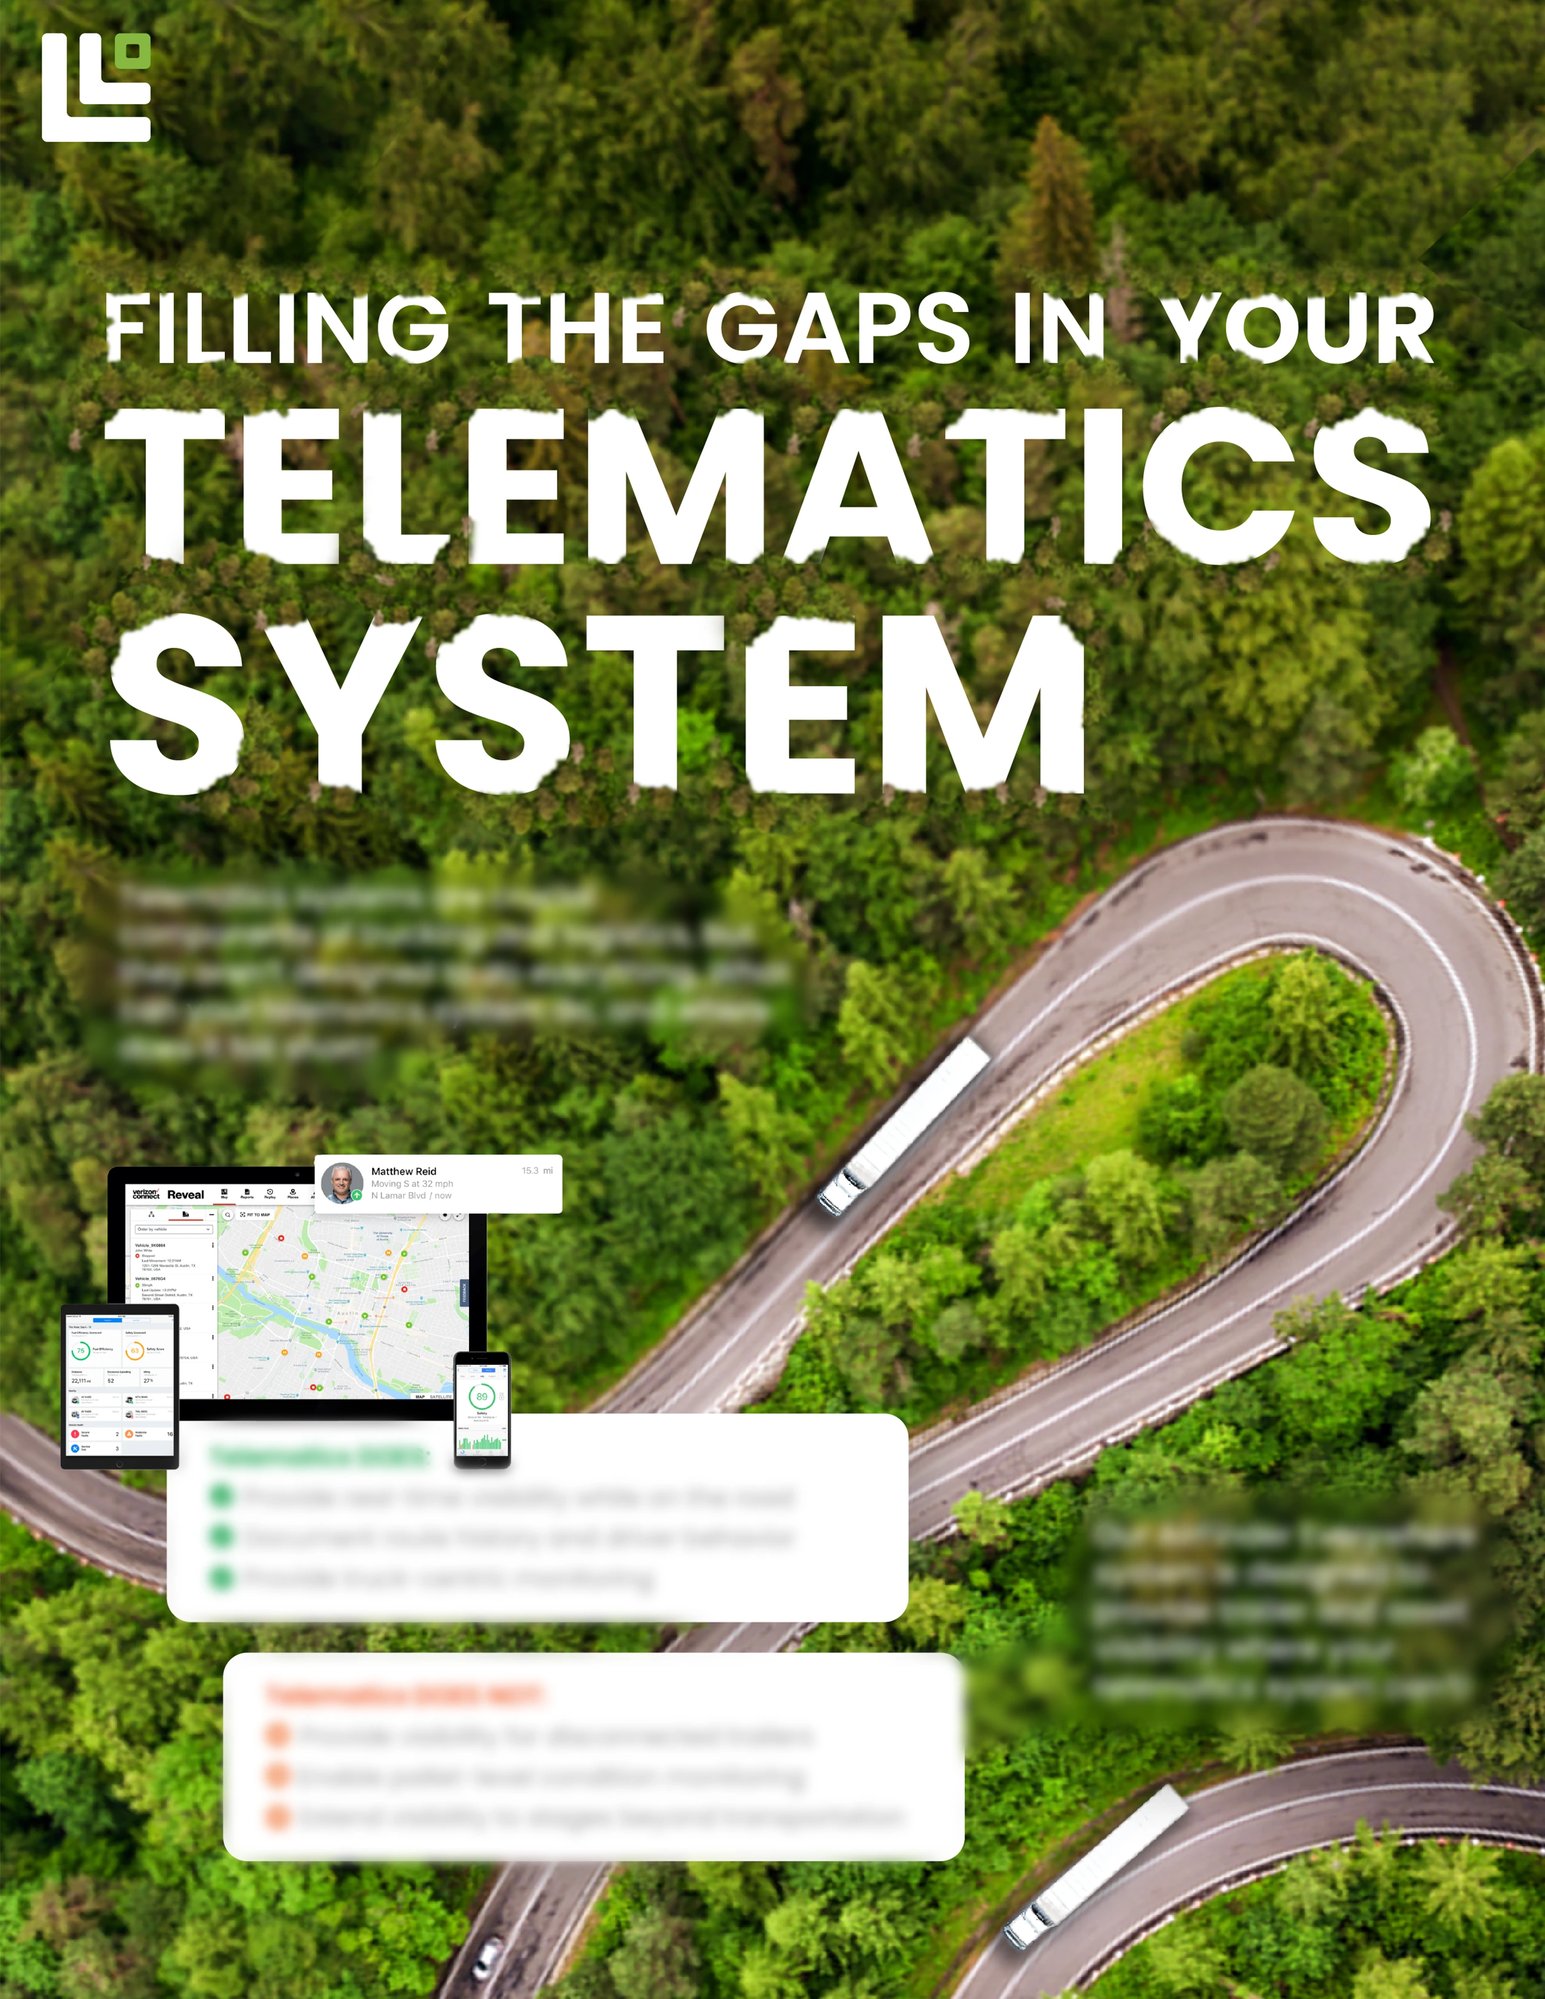 Filling the Gaps in Your Telematics System